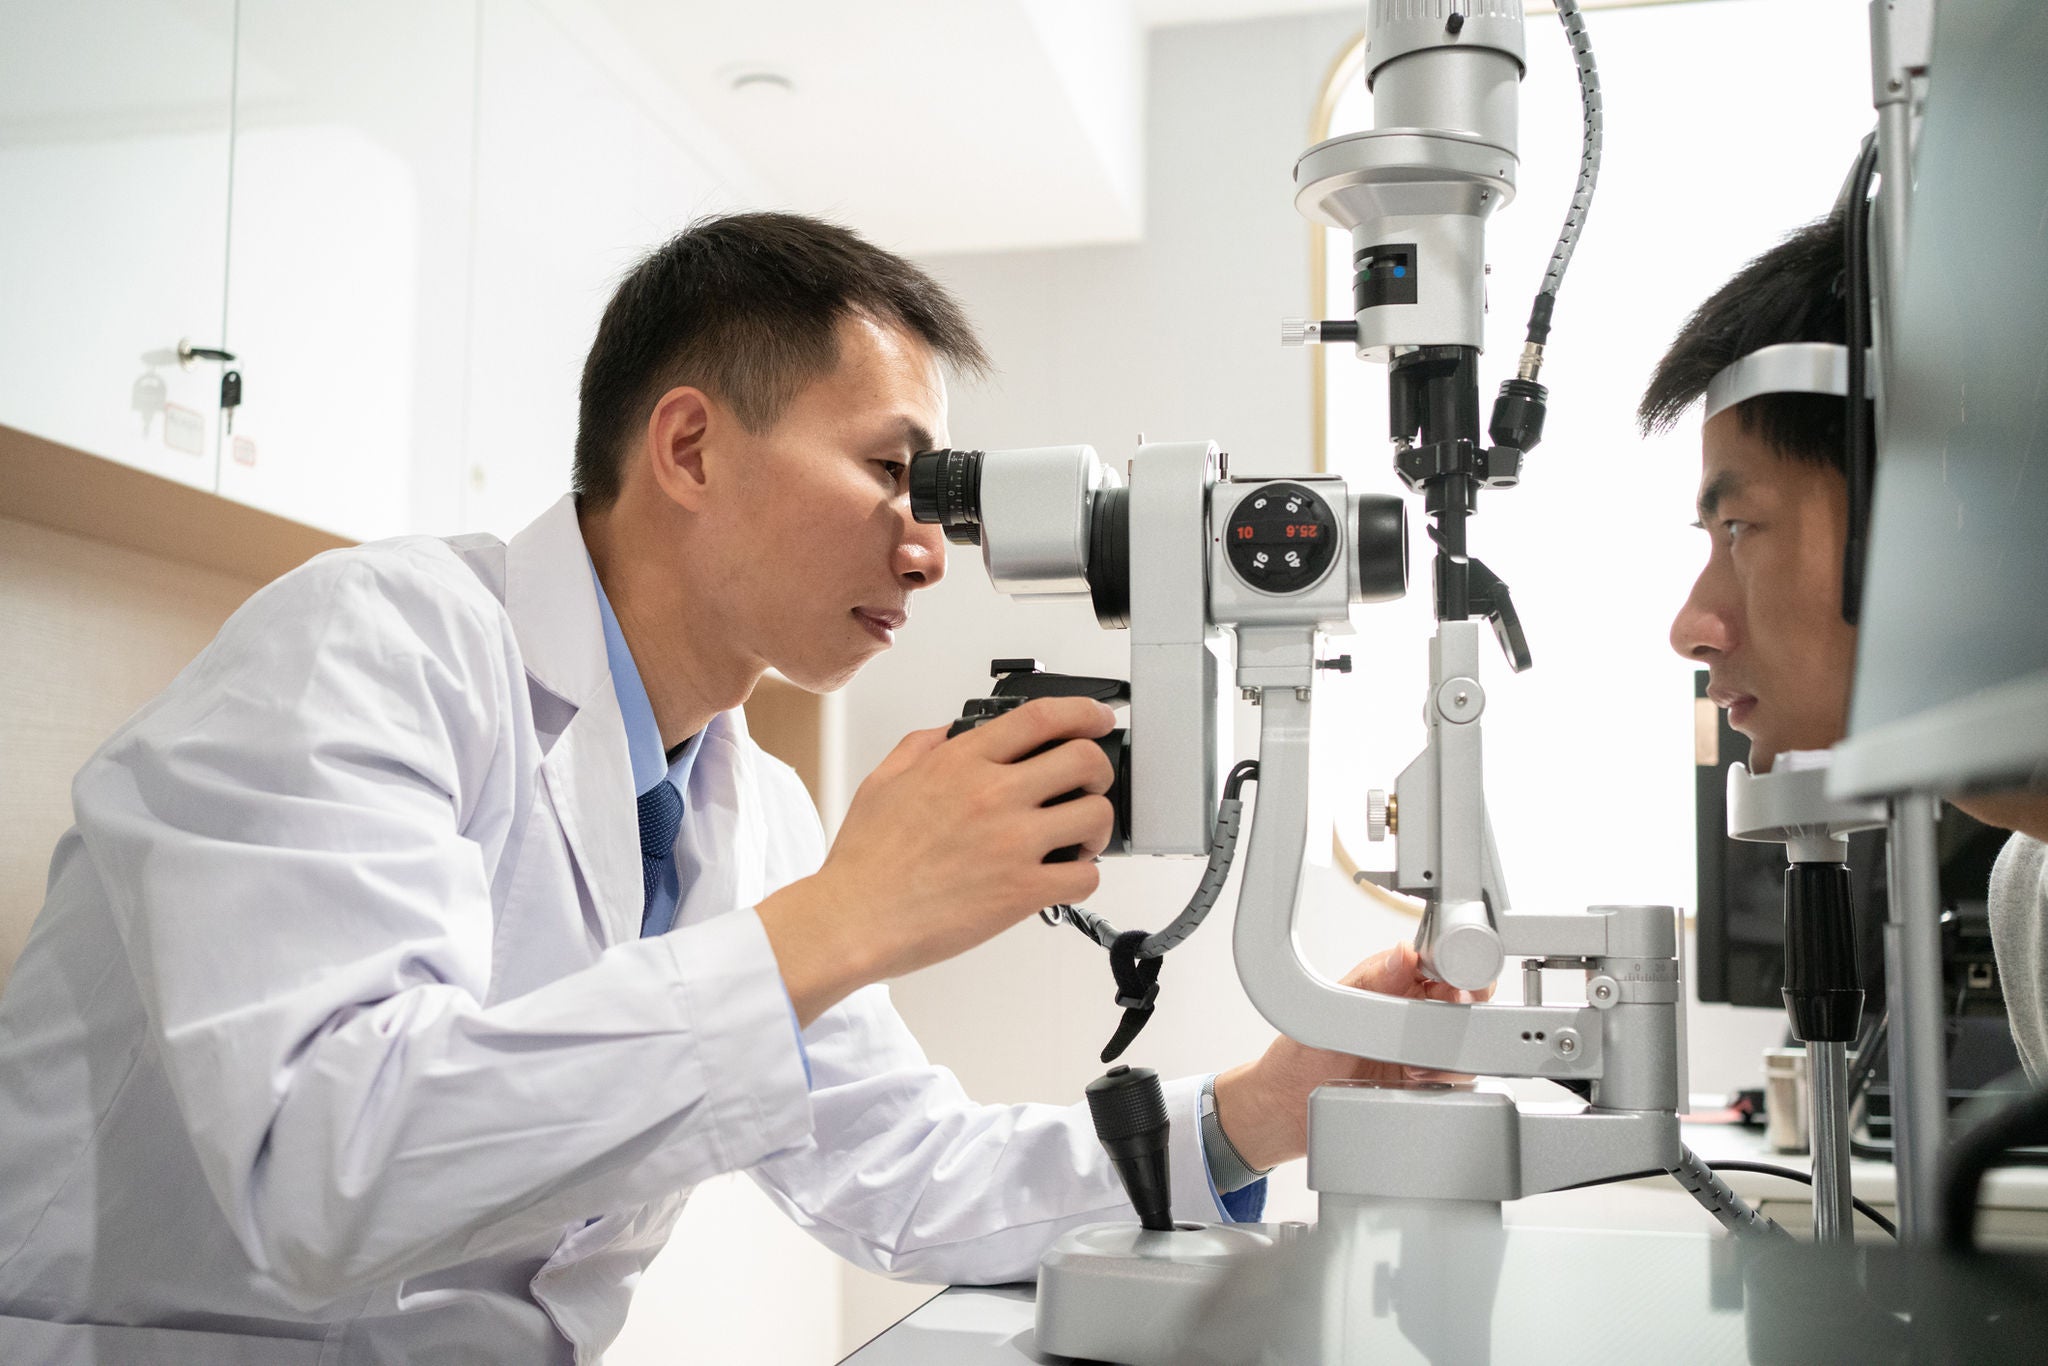 The ophthalmologist is examining the eyes of the patient